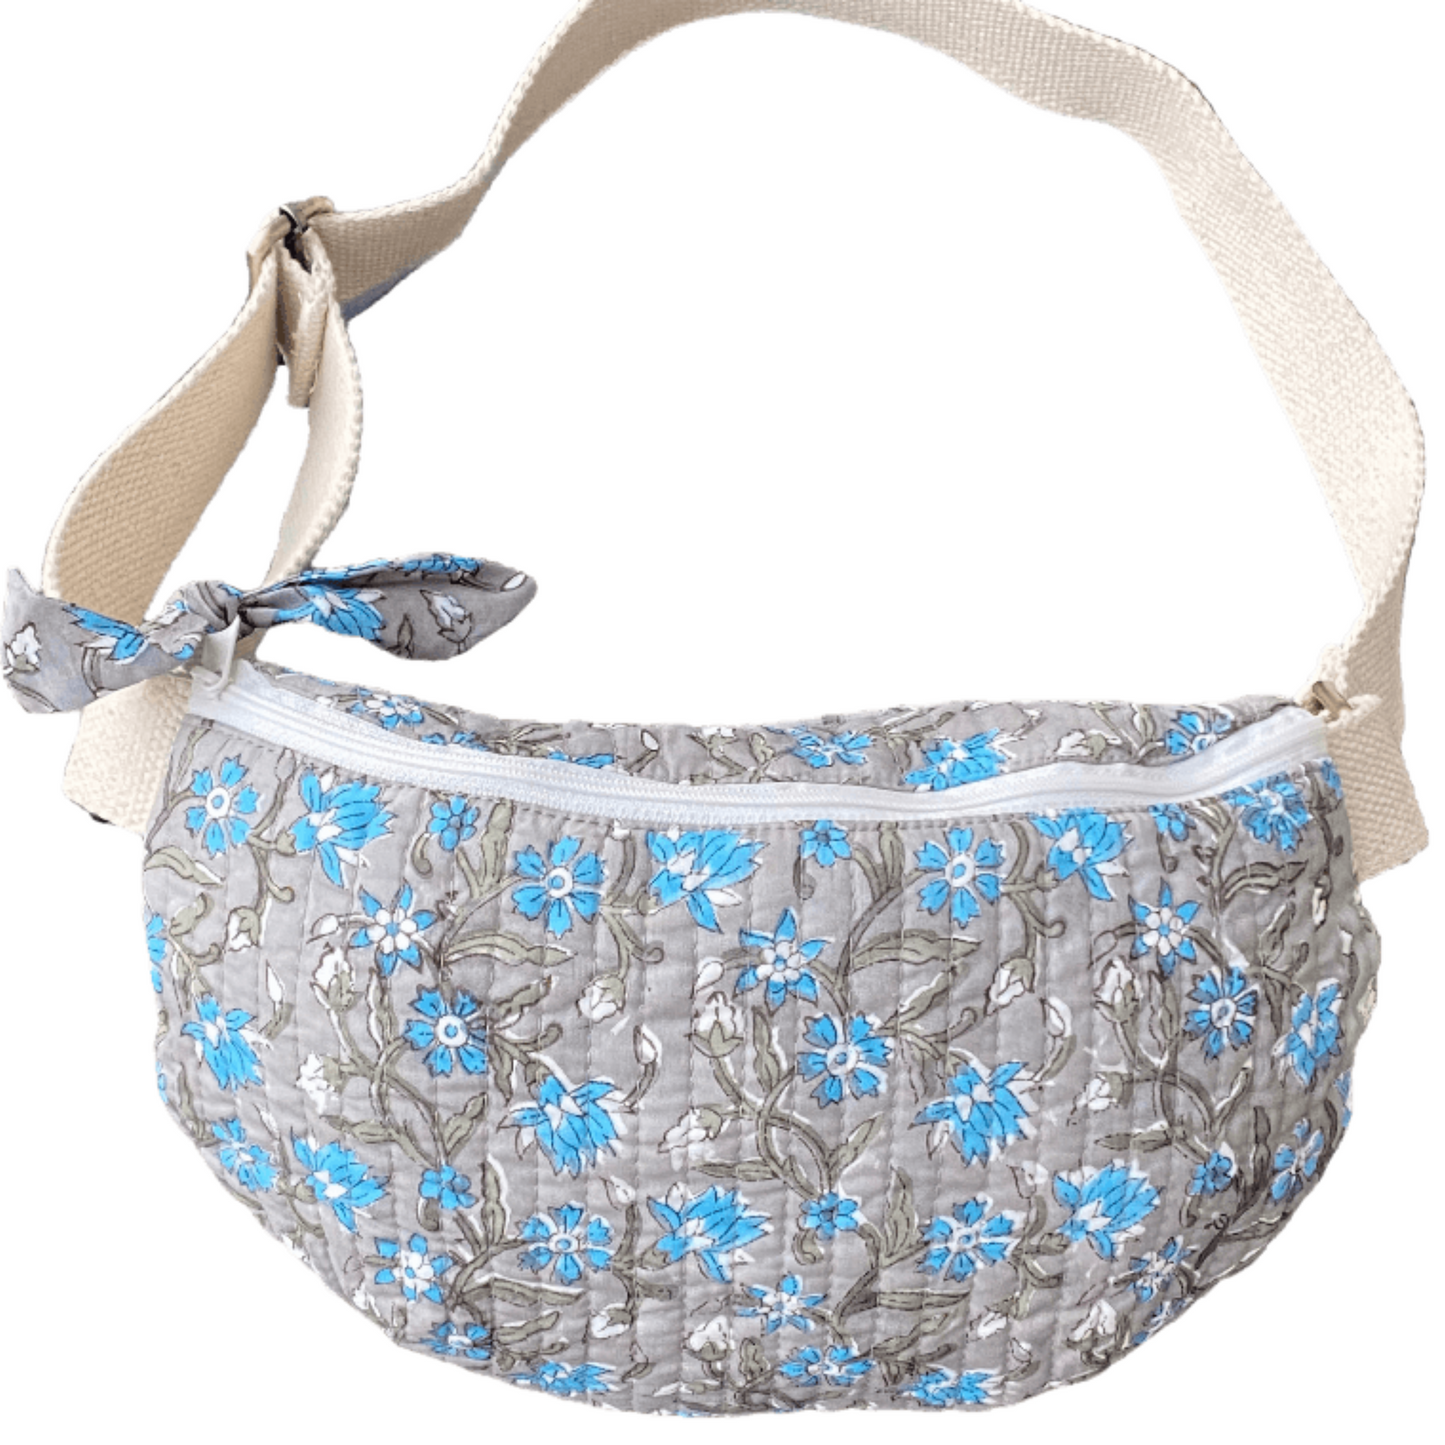 Lightweight Cotton Sling Bag - Ideal for Travel and Adventures